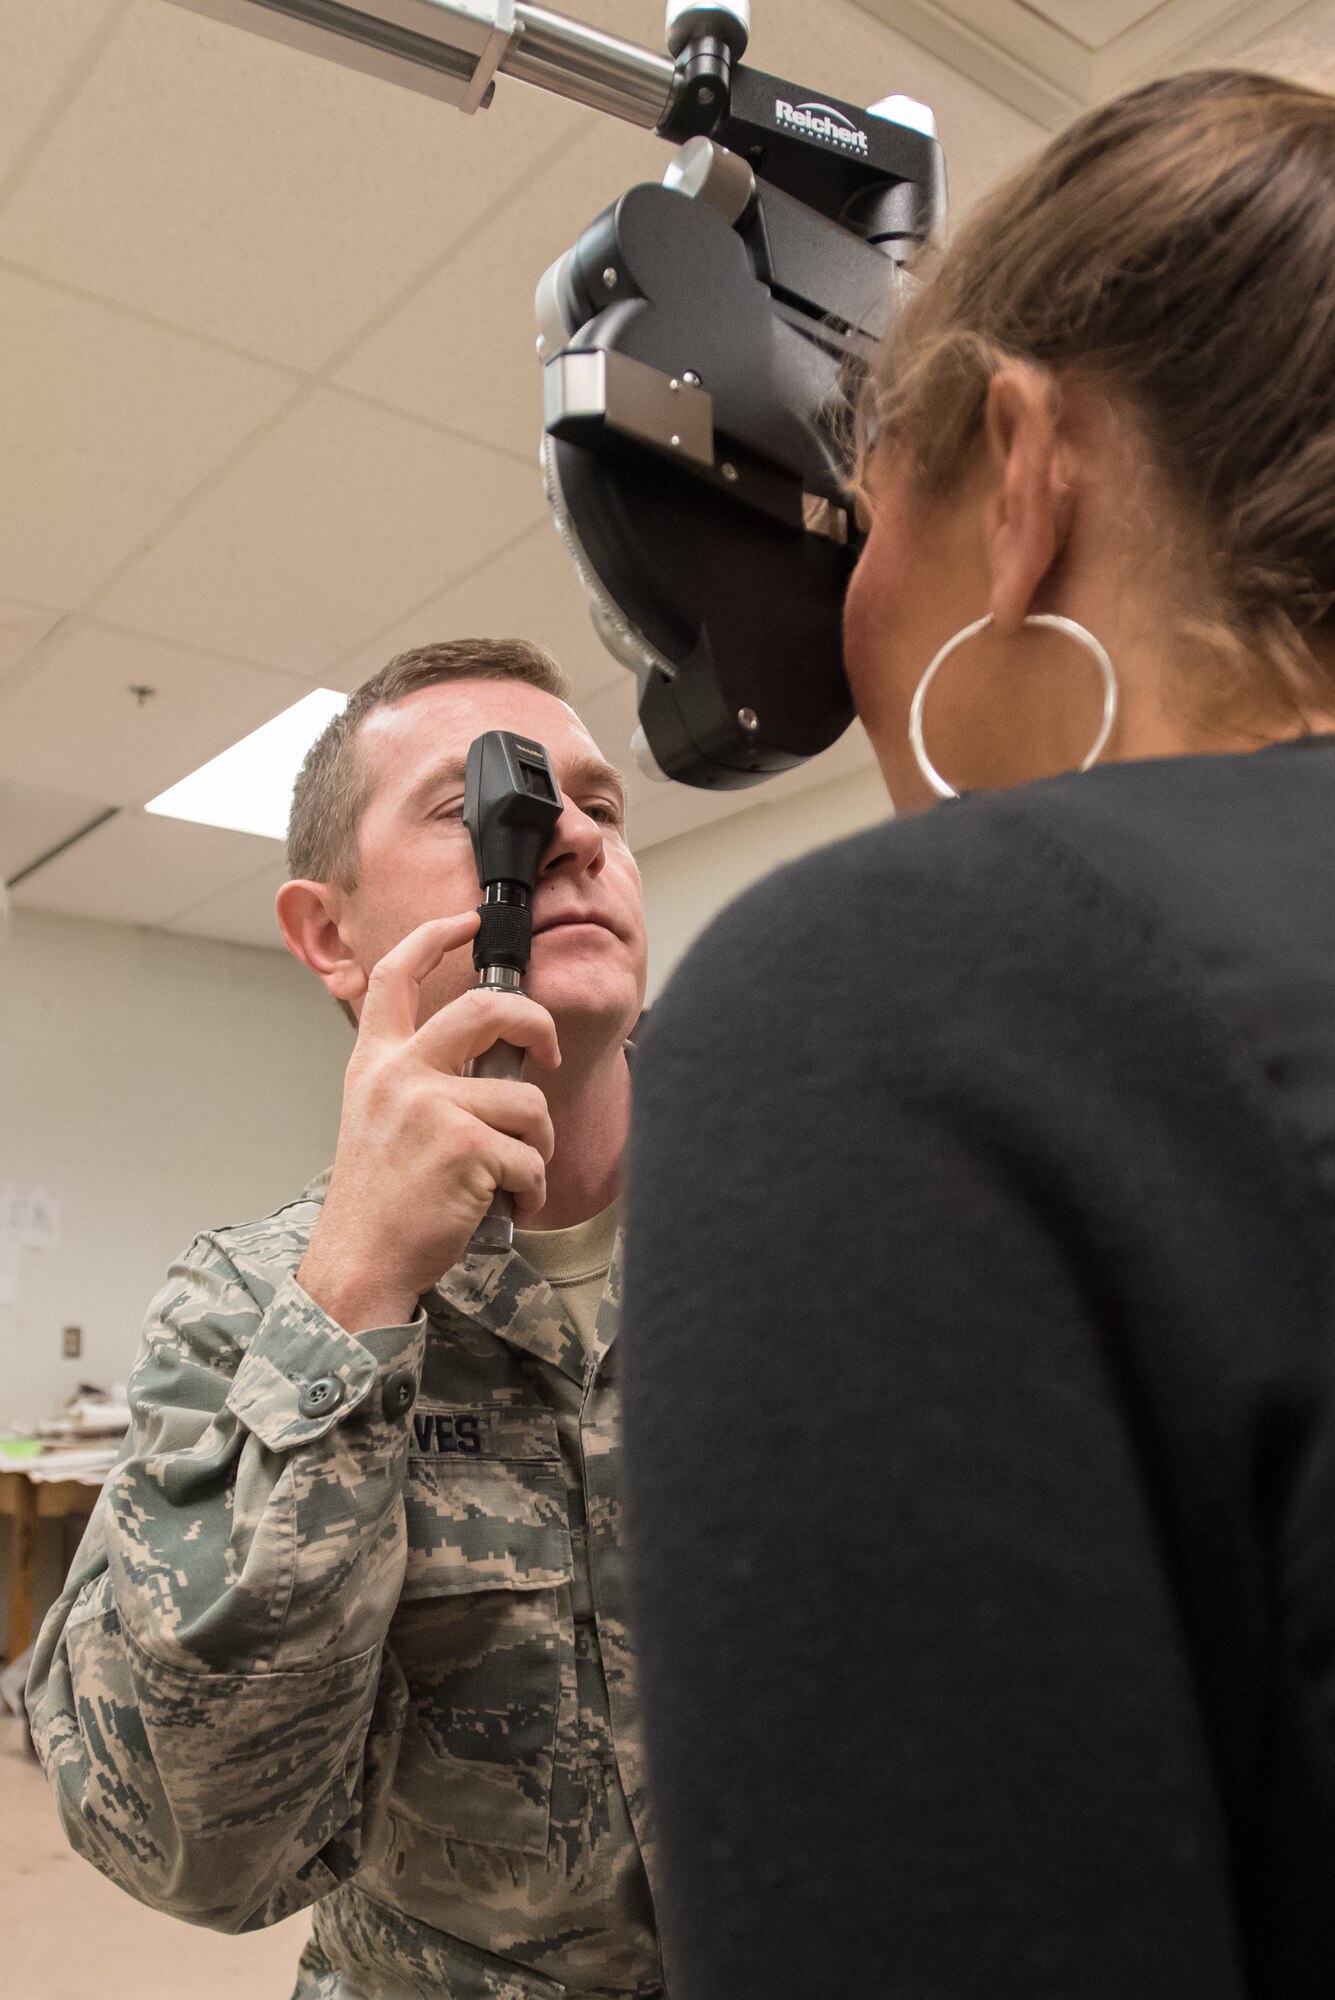 U.S. Air Force Maj. Robert Groves, an optometrist from the New Hampshire Air National Guard’s 157th Air Refueling Wing, examines a patient’s eyes at a health-care clinic being operated by the Air Guard and U.S. Navy Reserve at Estill County High School in Irvine, Ky., June 21, 2018. The clinic is one of four that comprised Operation Bobcat, a 10-day mission to provide military medical troops with crucial training in field operations and logistics while offering no-cost health care to the residents of Eastern Kentucky. The clinics, which operated from June 15-24, offered non-emergent medical care; sports physicals; dental cleanings, fillings and extractions; eye exams and no-cost prescription eye glasses. (U.S. Air National Guard photo by Lt. Col. Dale Greer)